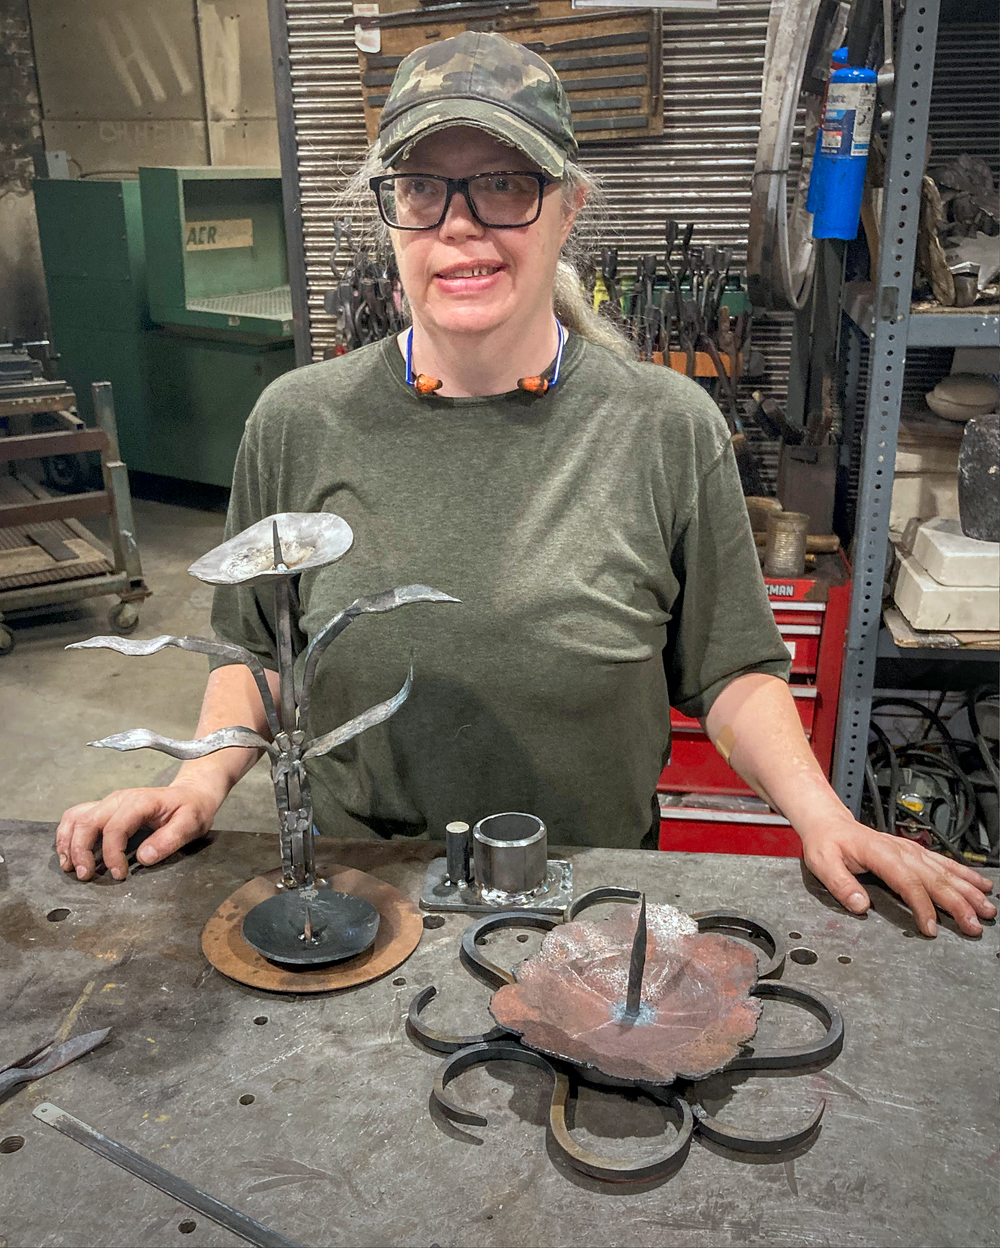 Blacksmithing: An Artform, A Culture, and a Piece of the Past